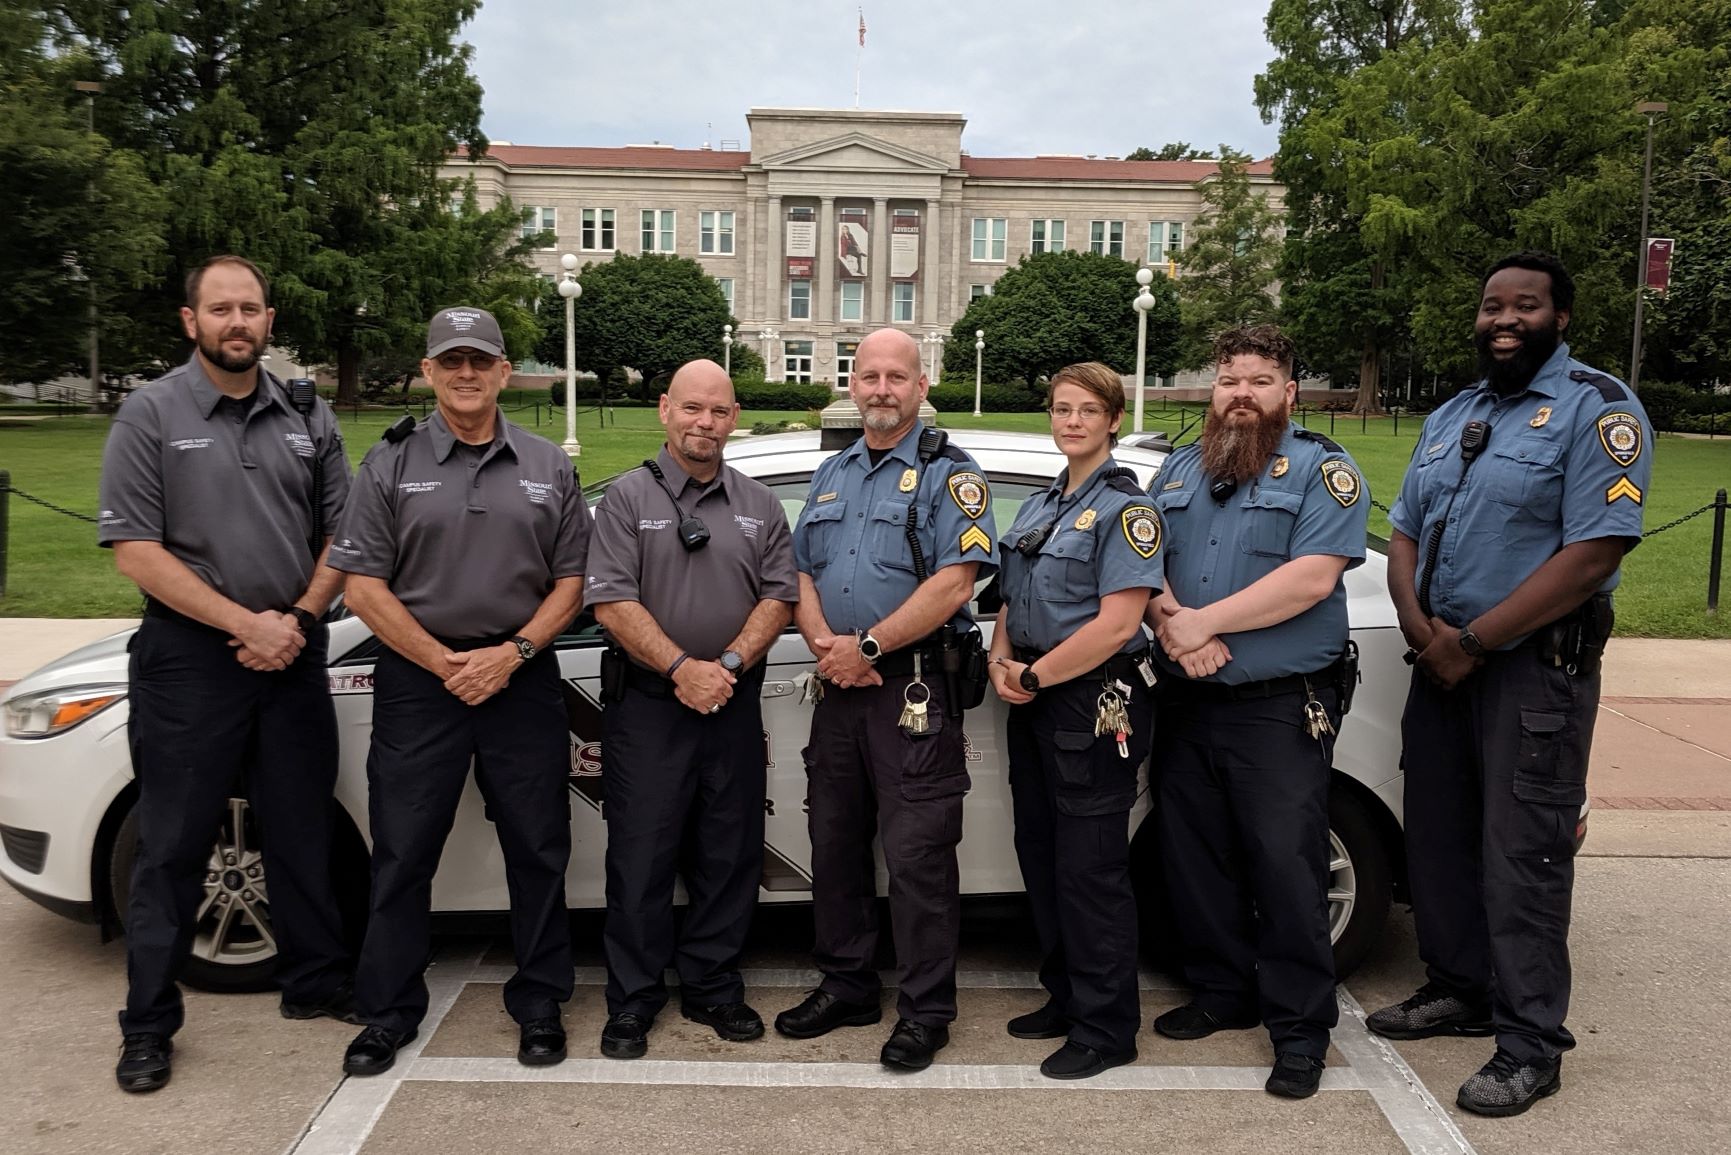 This photo shows the four off-going Campus Safety personnel with the original police style uniform next to the three on-coming personnel with the new polo style uniform.